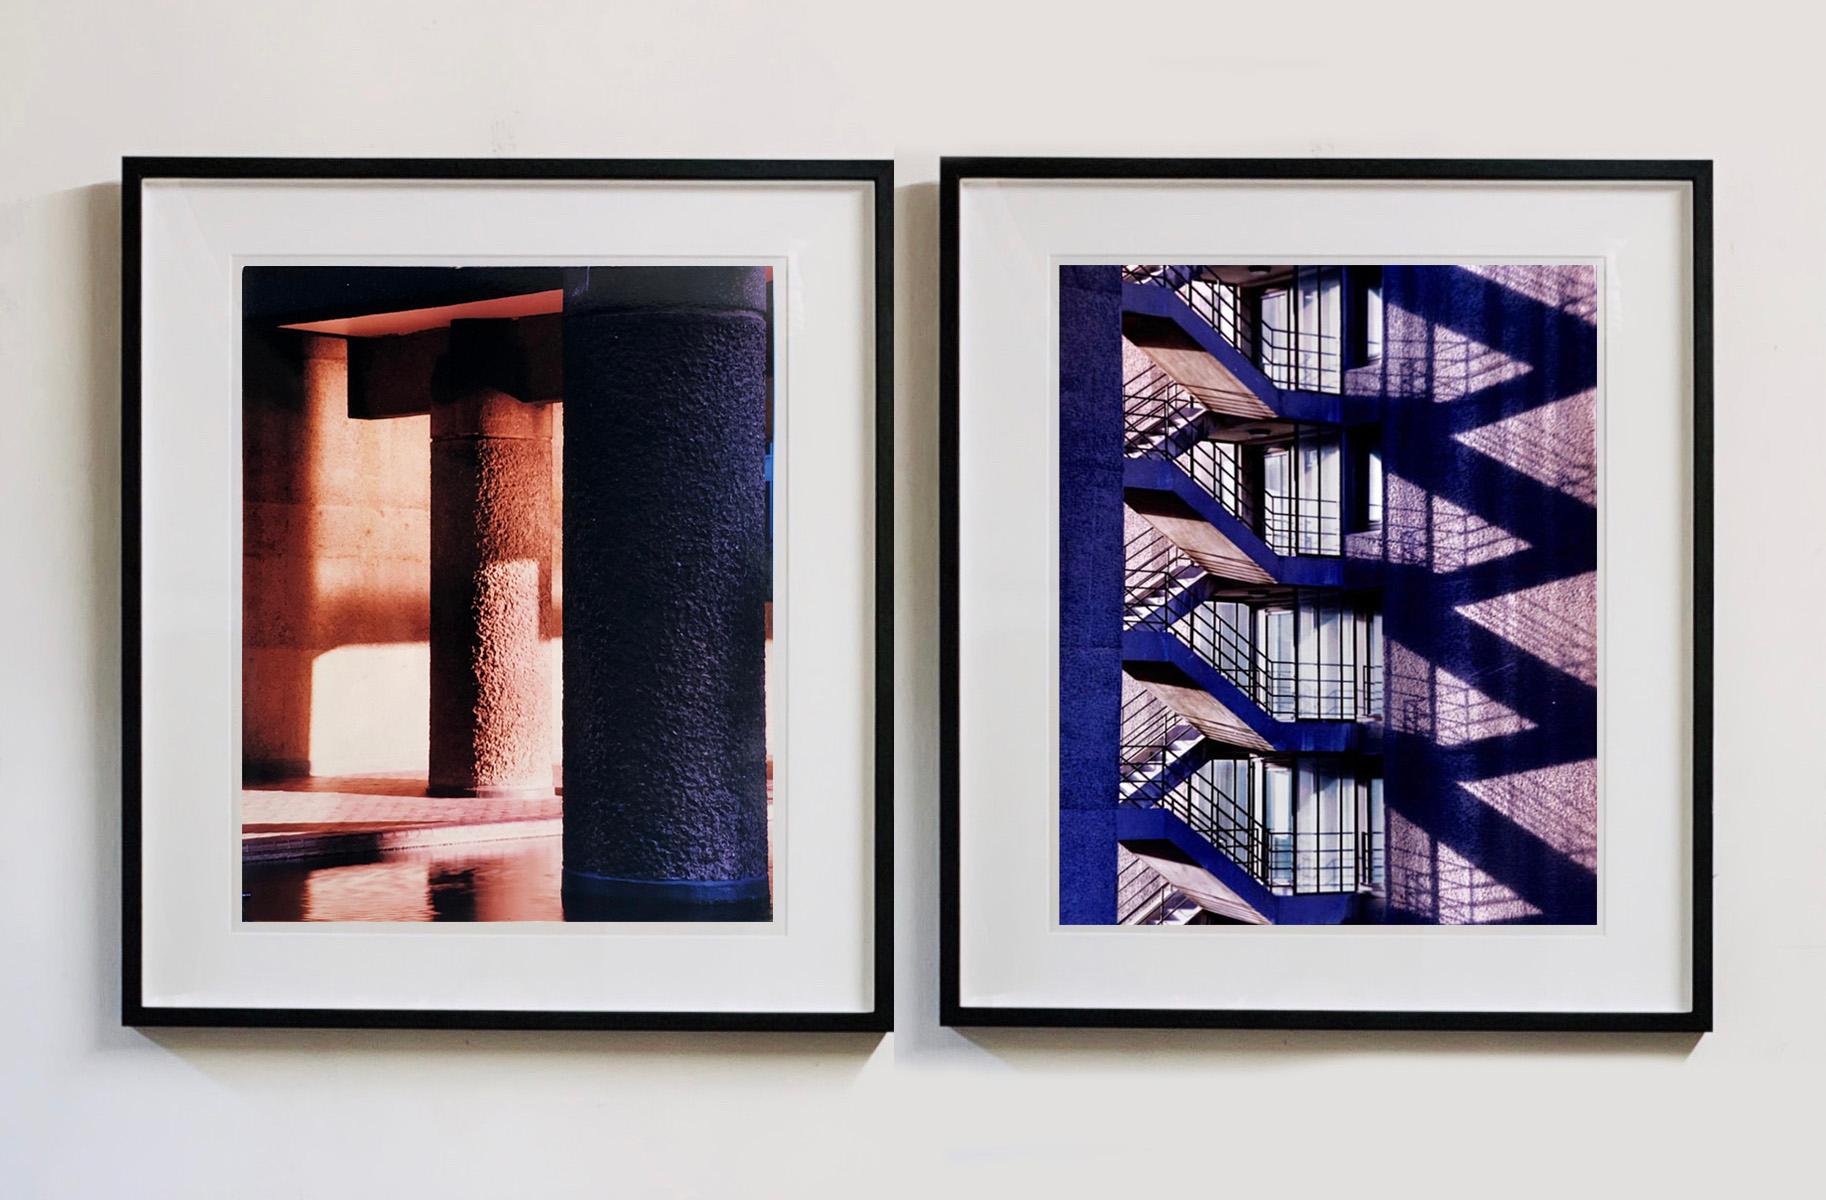 'Brutalist Symphony', photographed on London's Barbican Estate. There is a subtle beauty in the light and colour of this conceptual architectural photograph of the famous Brutalist landmark.
